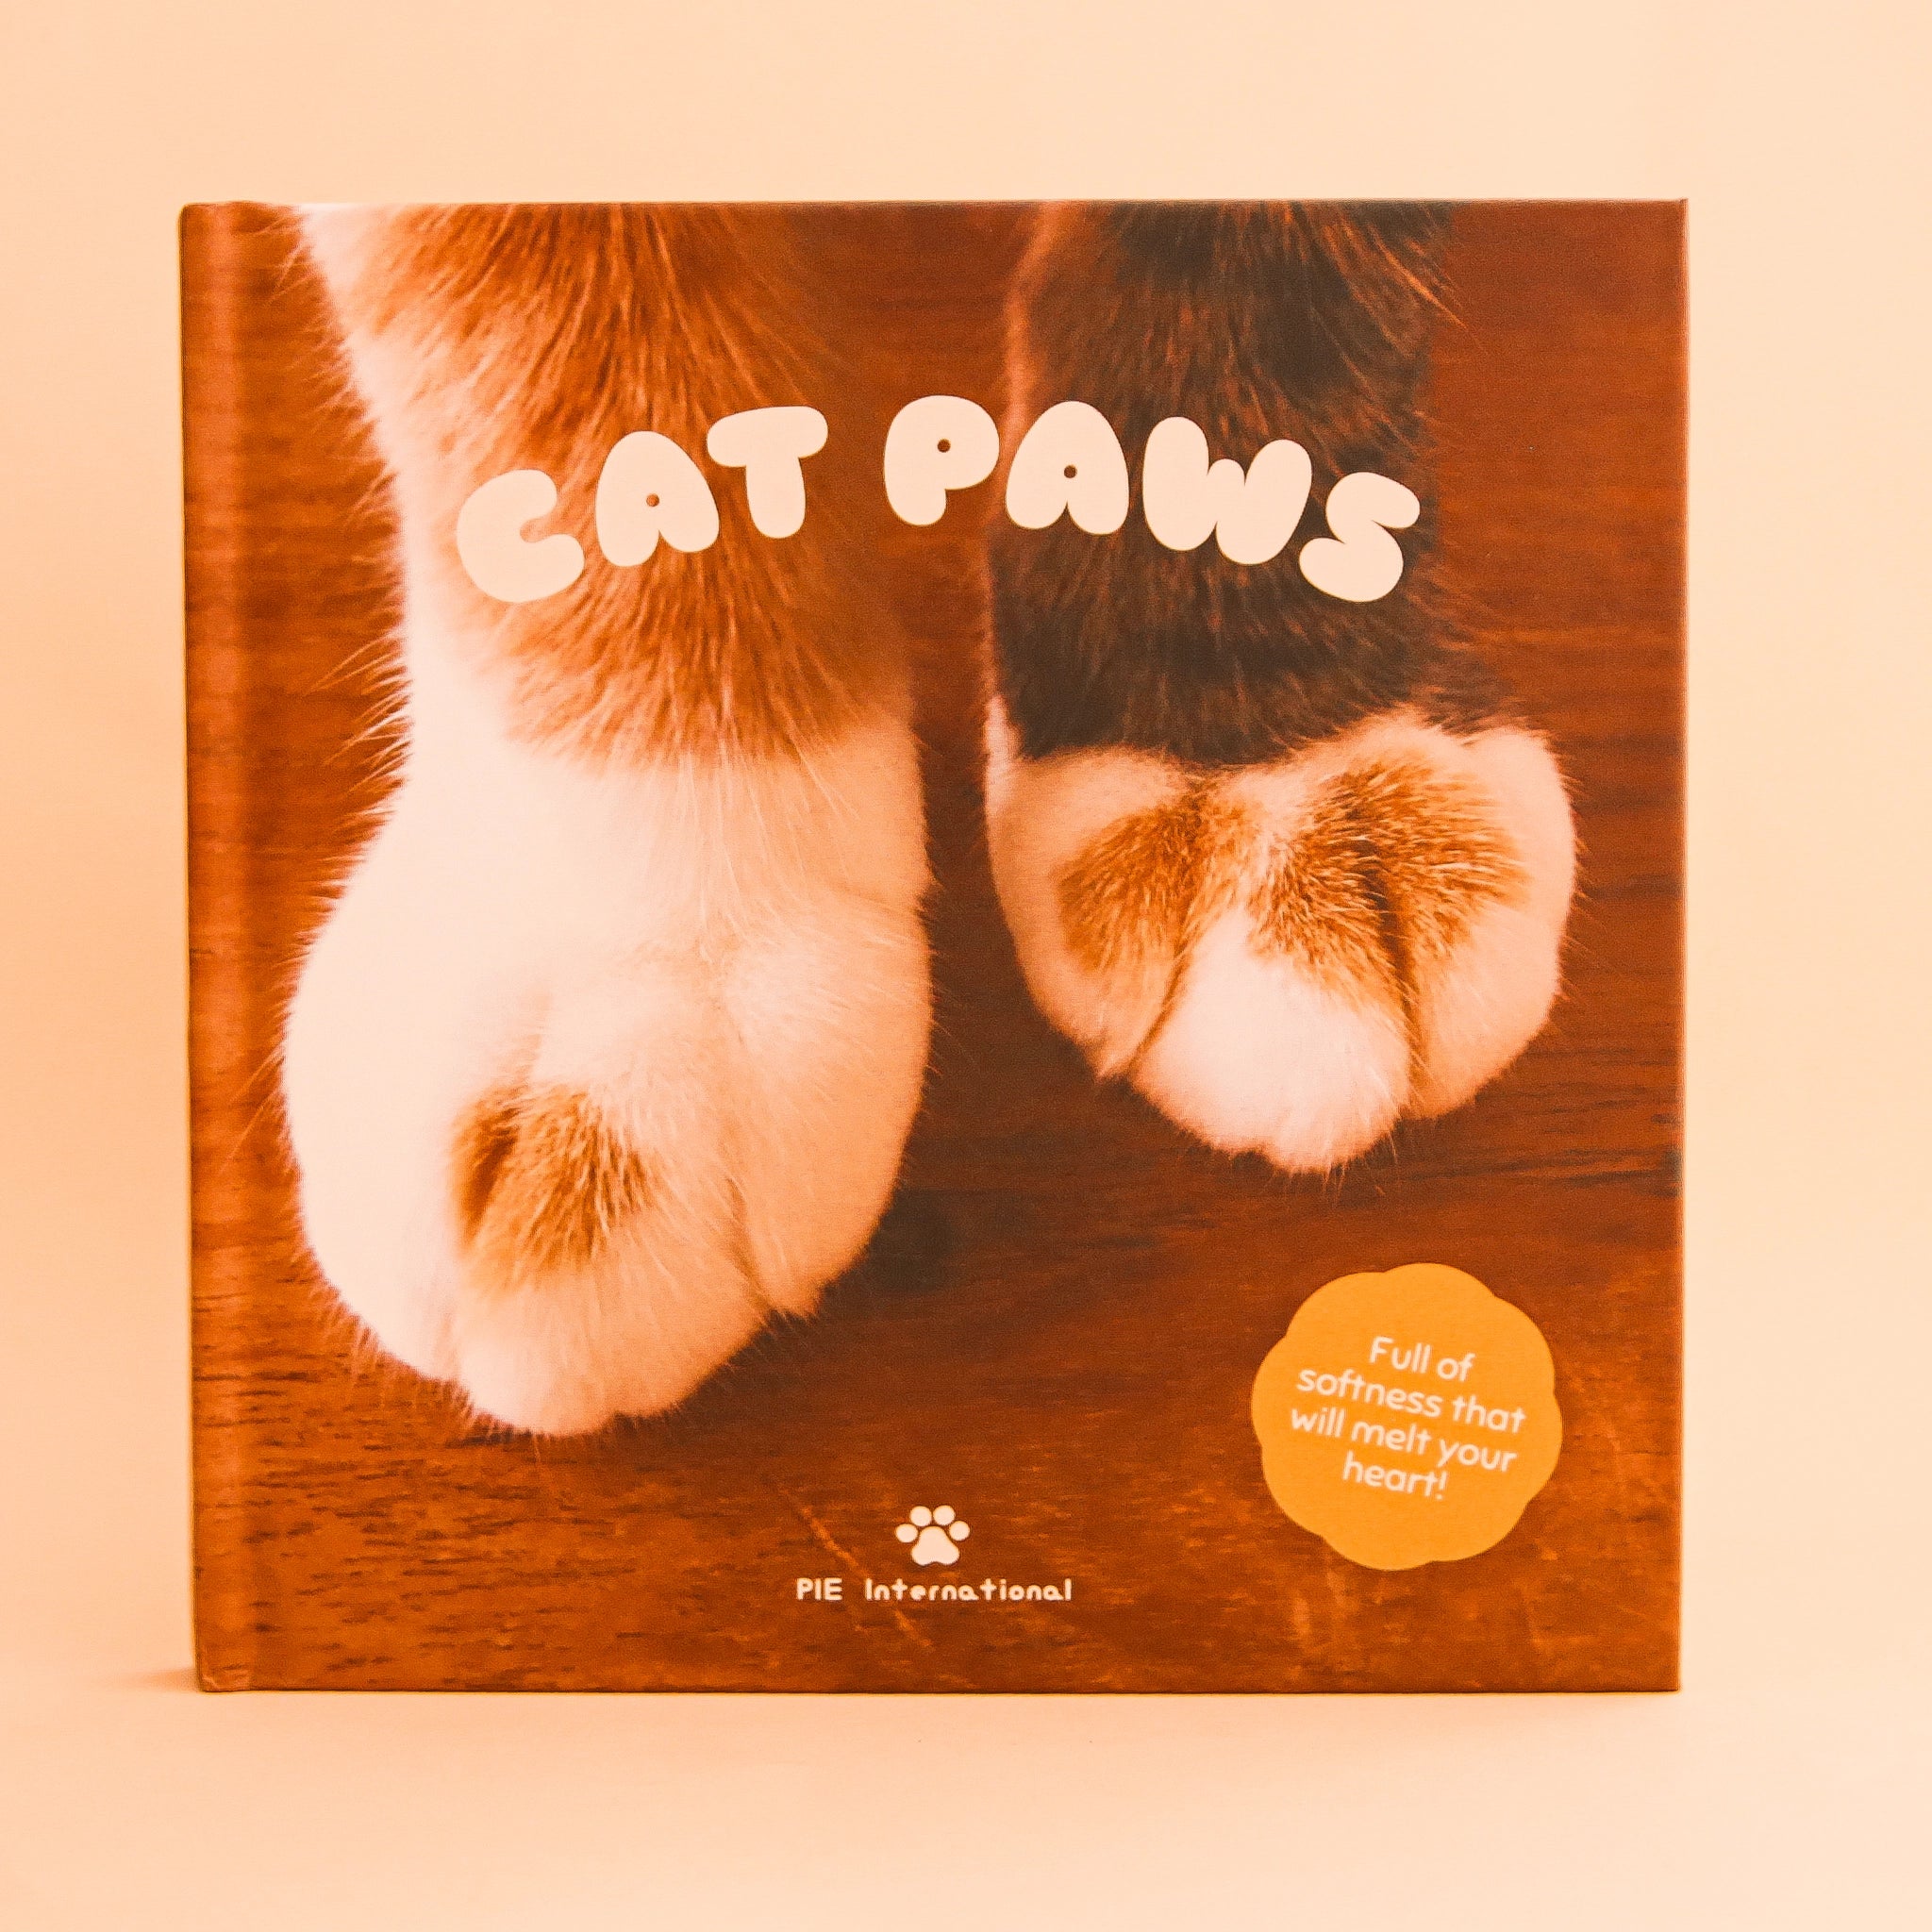 On a peach background is a book cover featuring a photograph of cat paws against a wood floor along with the title, &quot;Cat Paws&quot;, &quot;Full of softness that will melt your heart!&quot;.